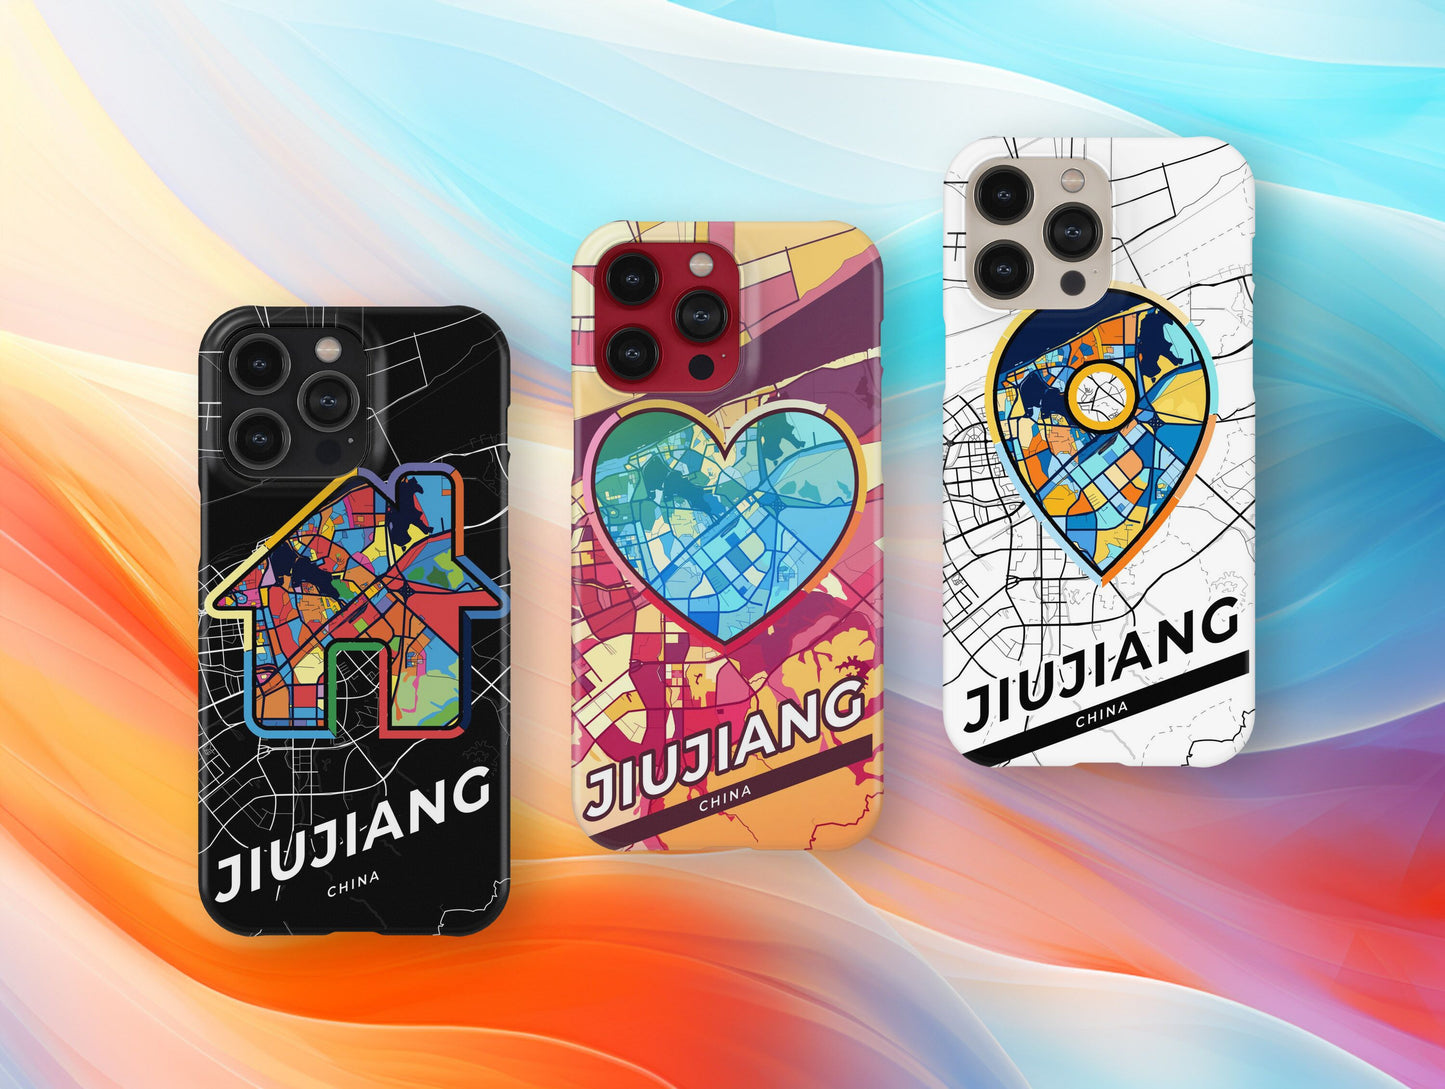 Jiujiang China slim phone case with colorful icon. Birthday, wedding or housewarming gift. Couple match cases.